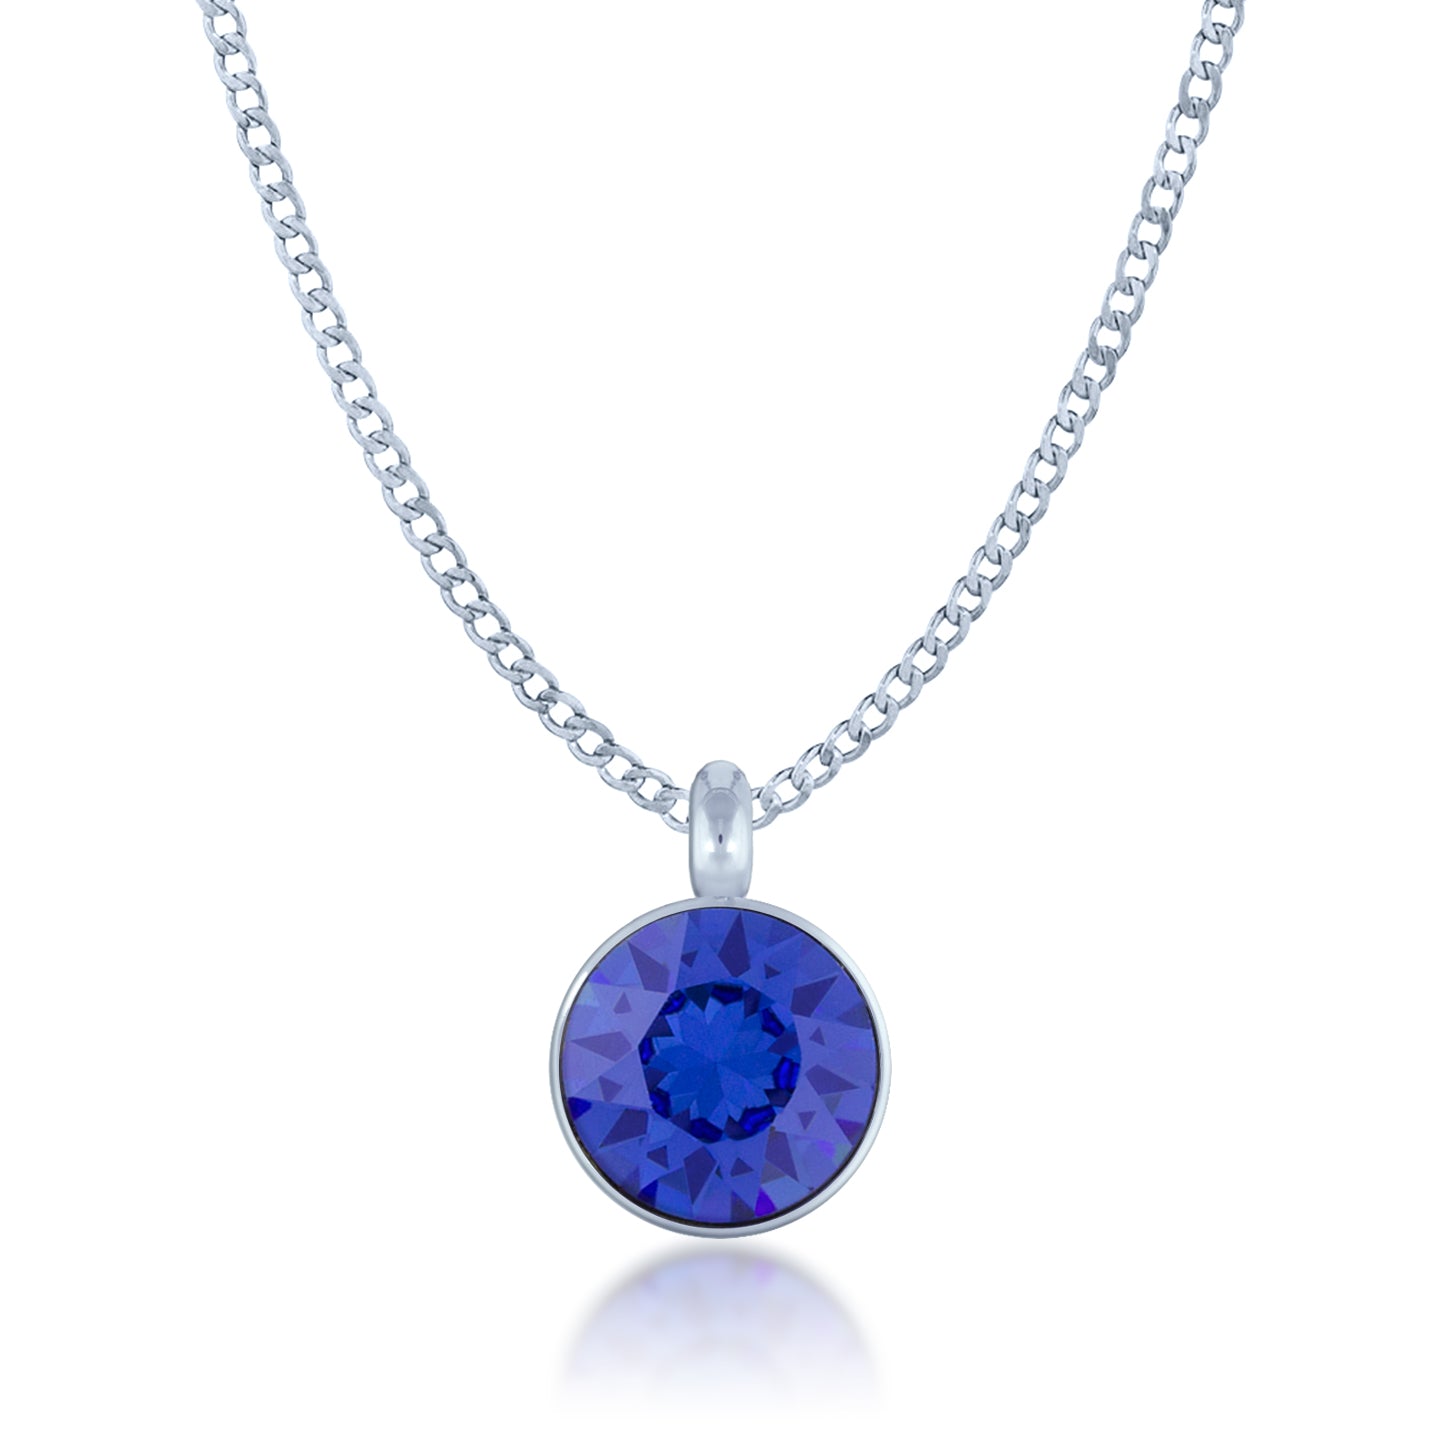 Bella Pendant Necklace with Blue Sapphire Round Crystals from Swarovski Silver Toned Rhodium Plated - Ed Heart